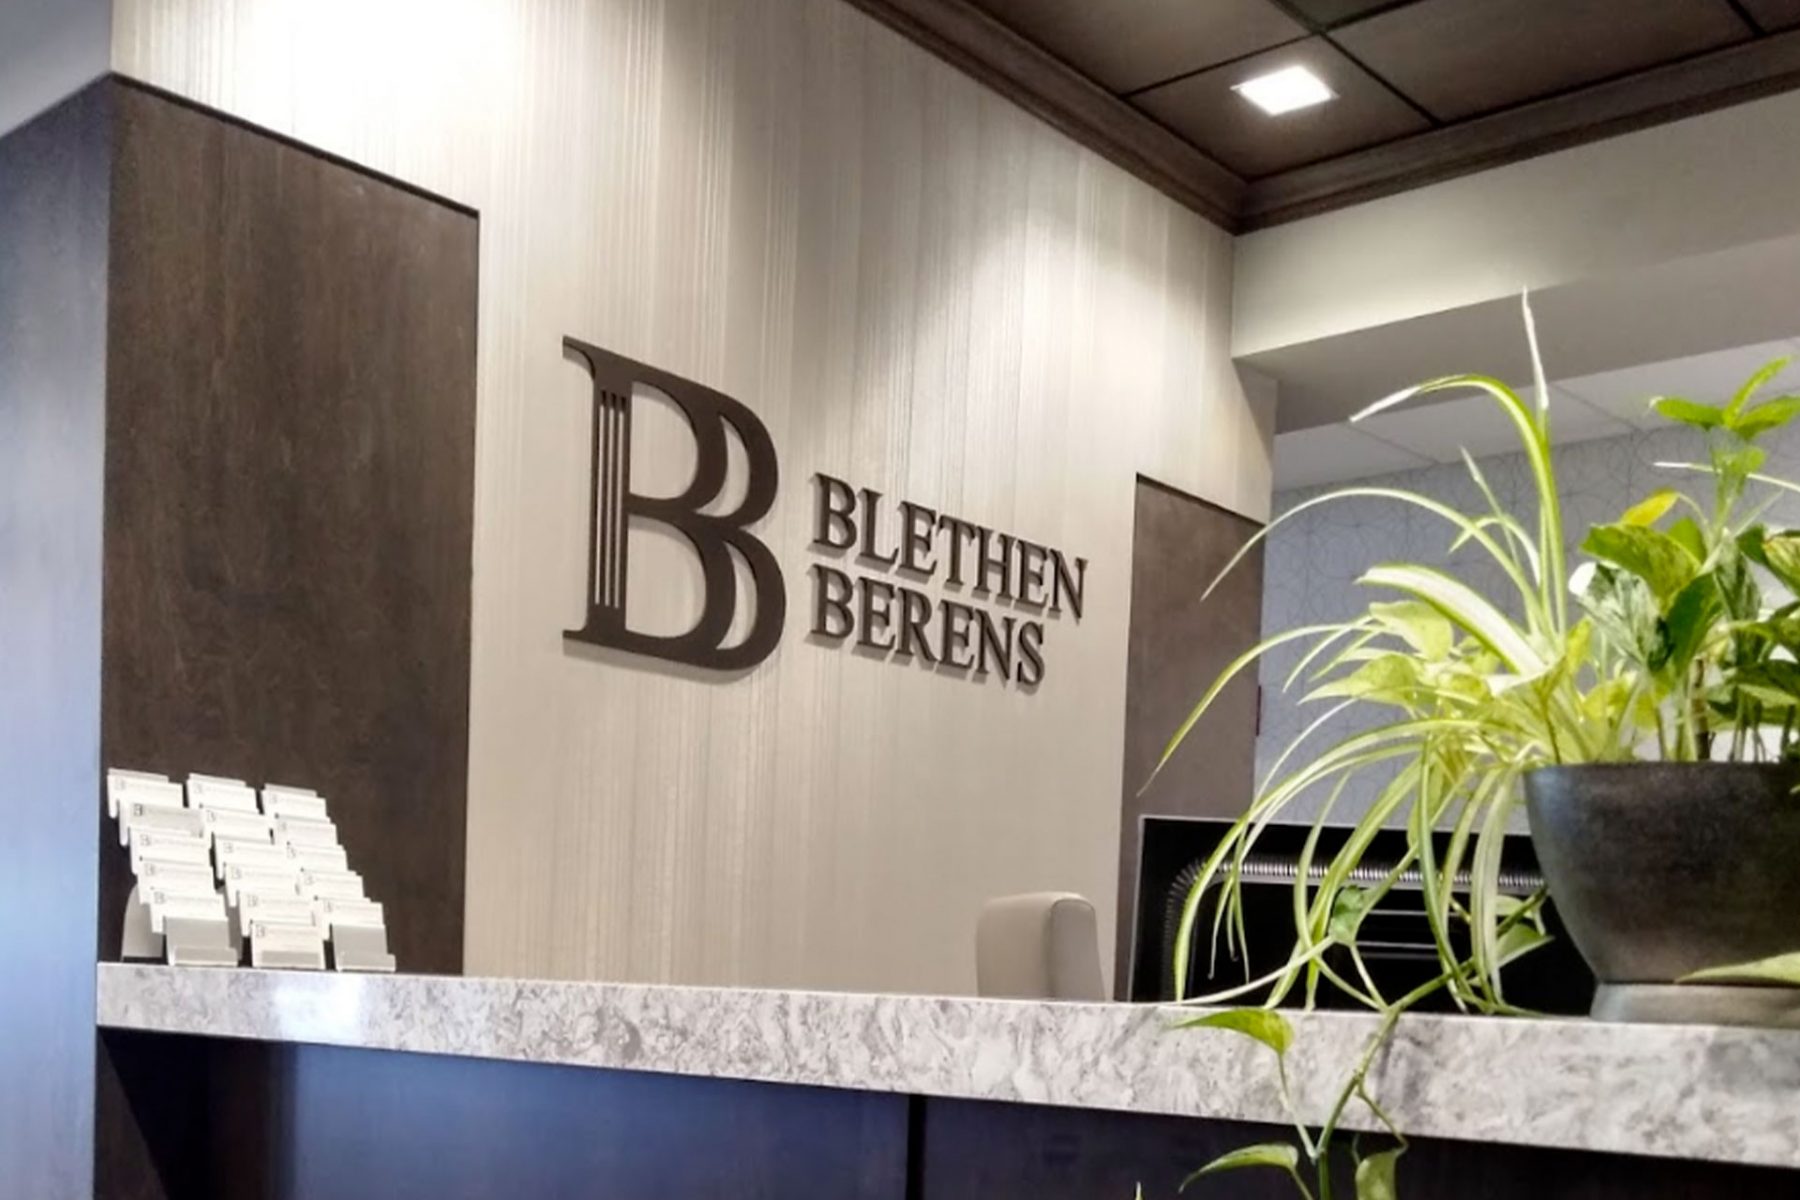 Blethen Berens Operations During Extended Stay at Home Order